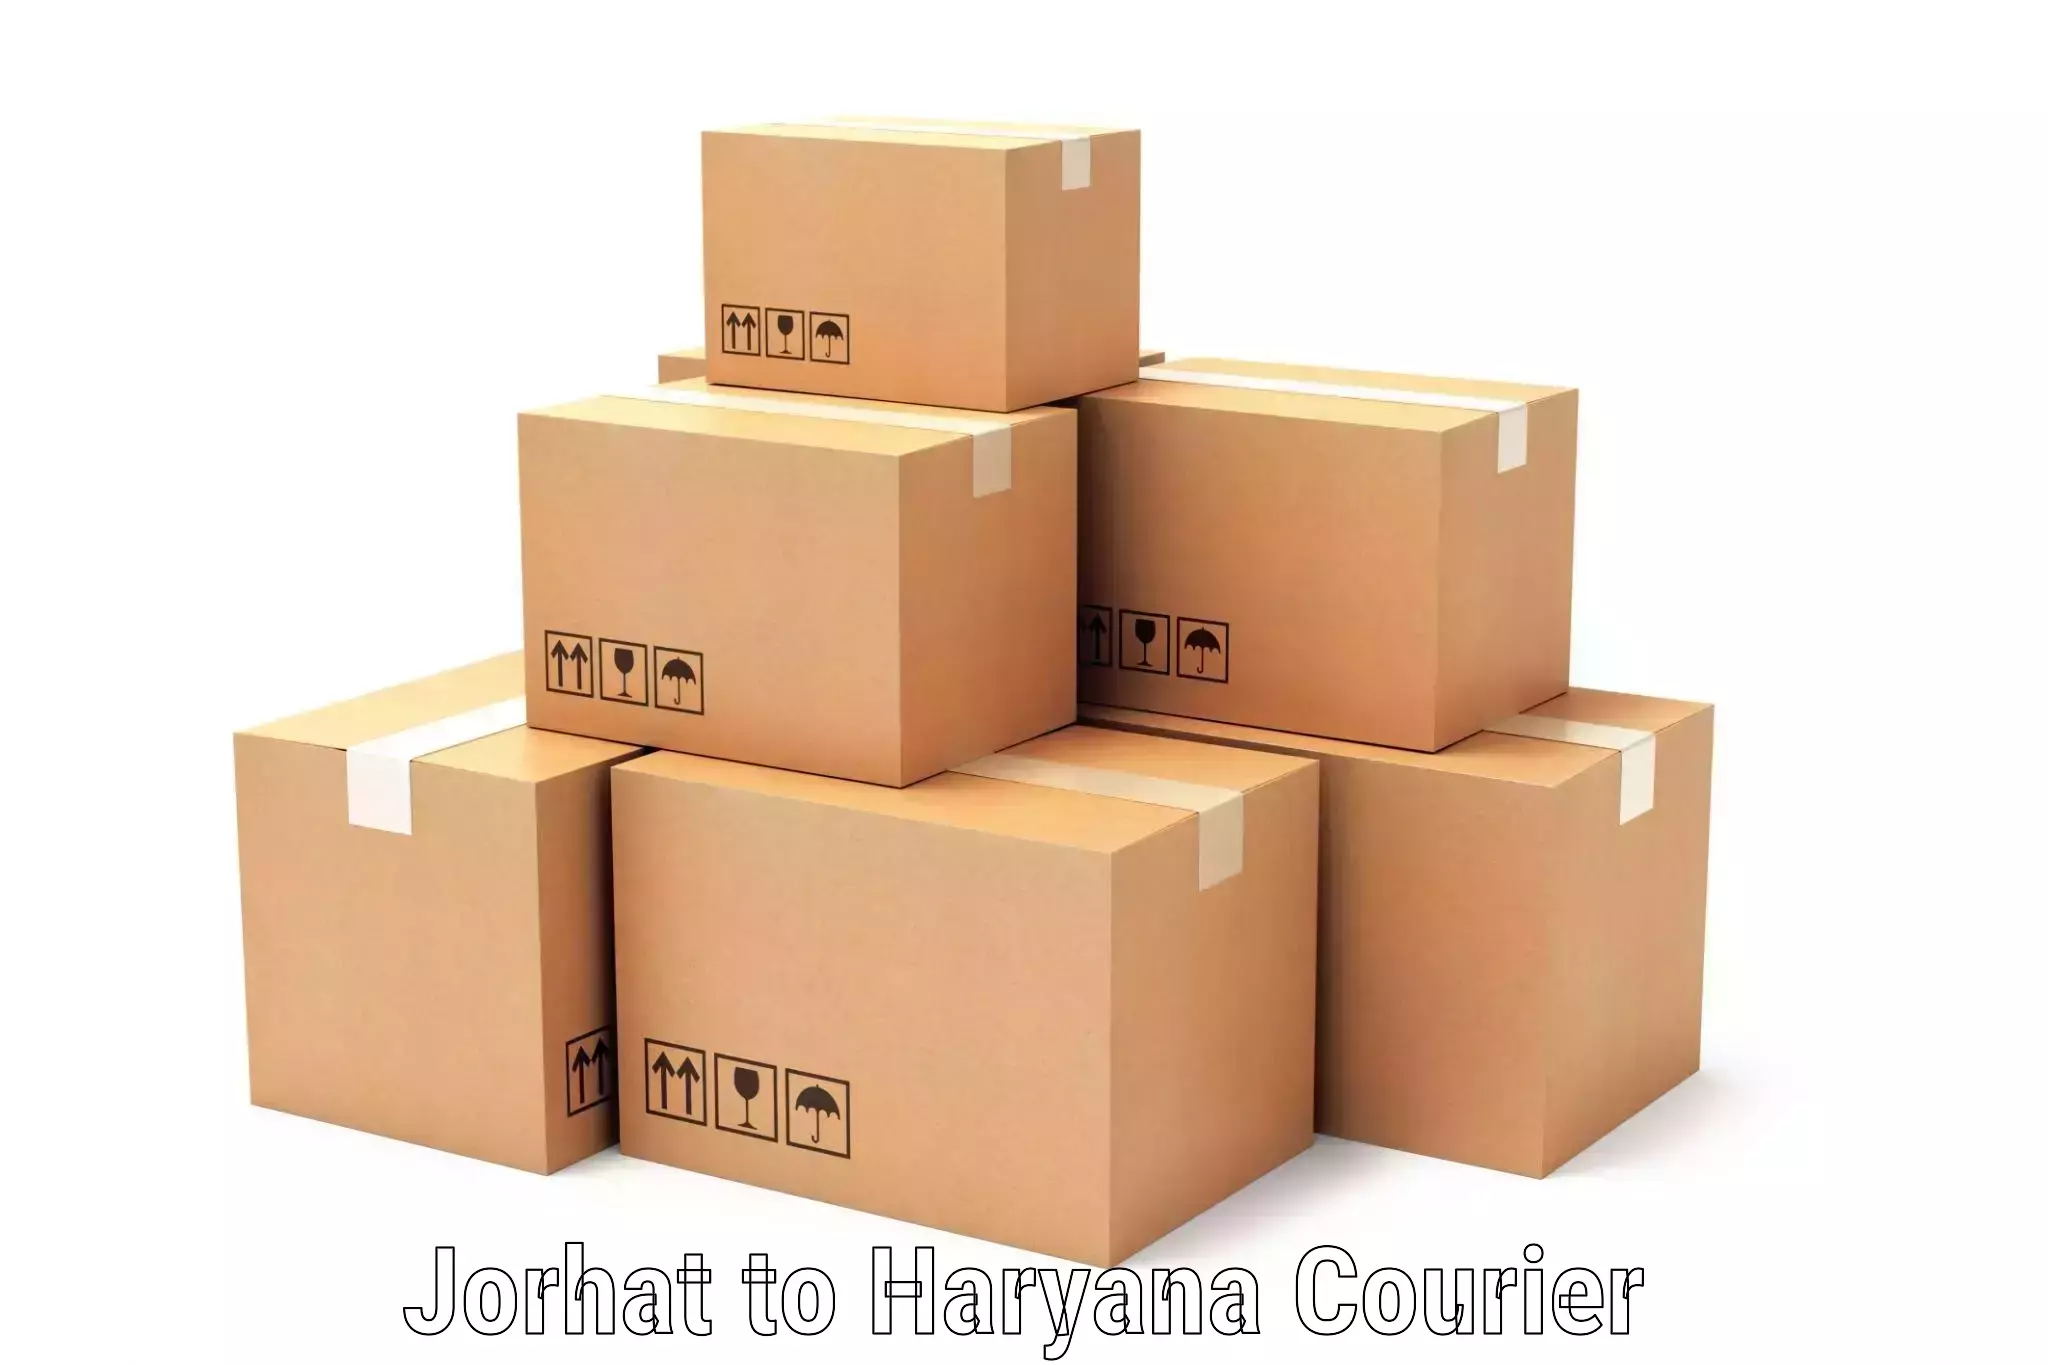 Weekend courier service Jorhat to Ambala